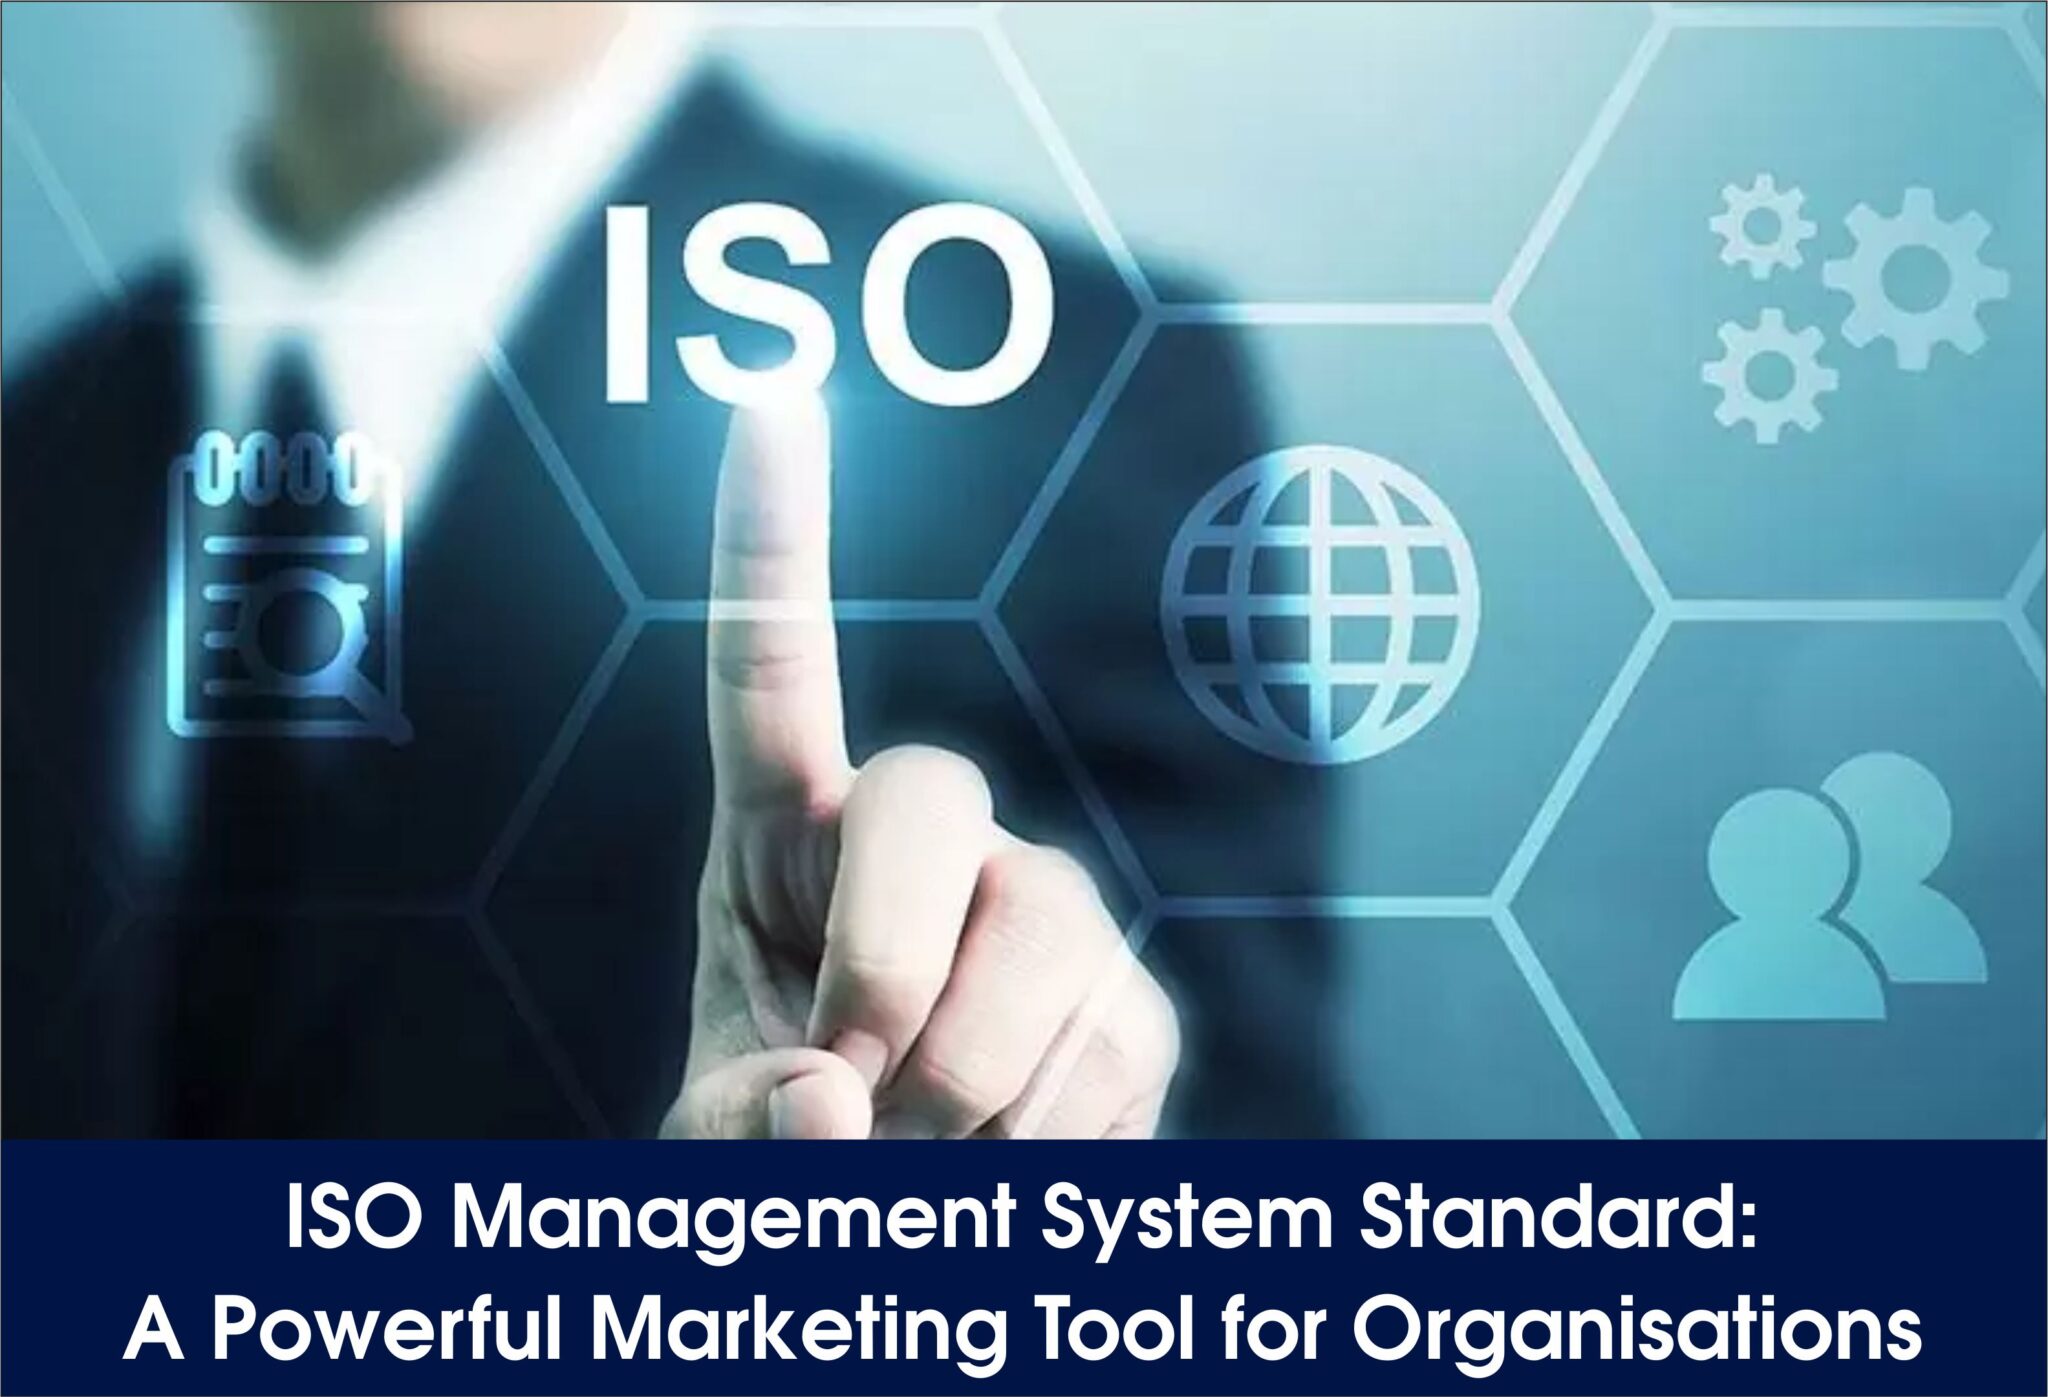 ISO Management System Standard: A Powerful Marketing Tool for Organisations